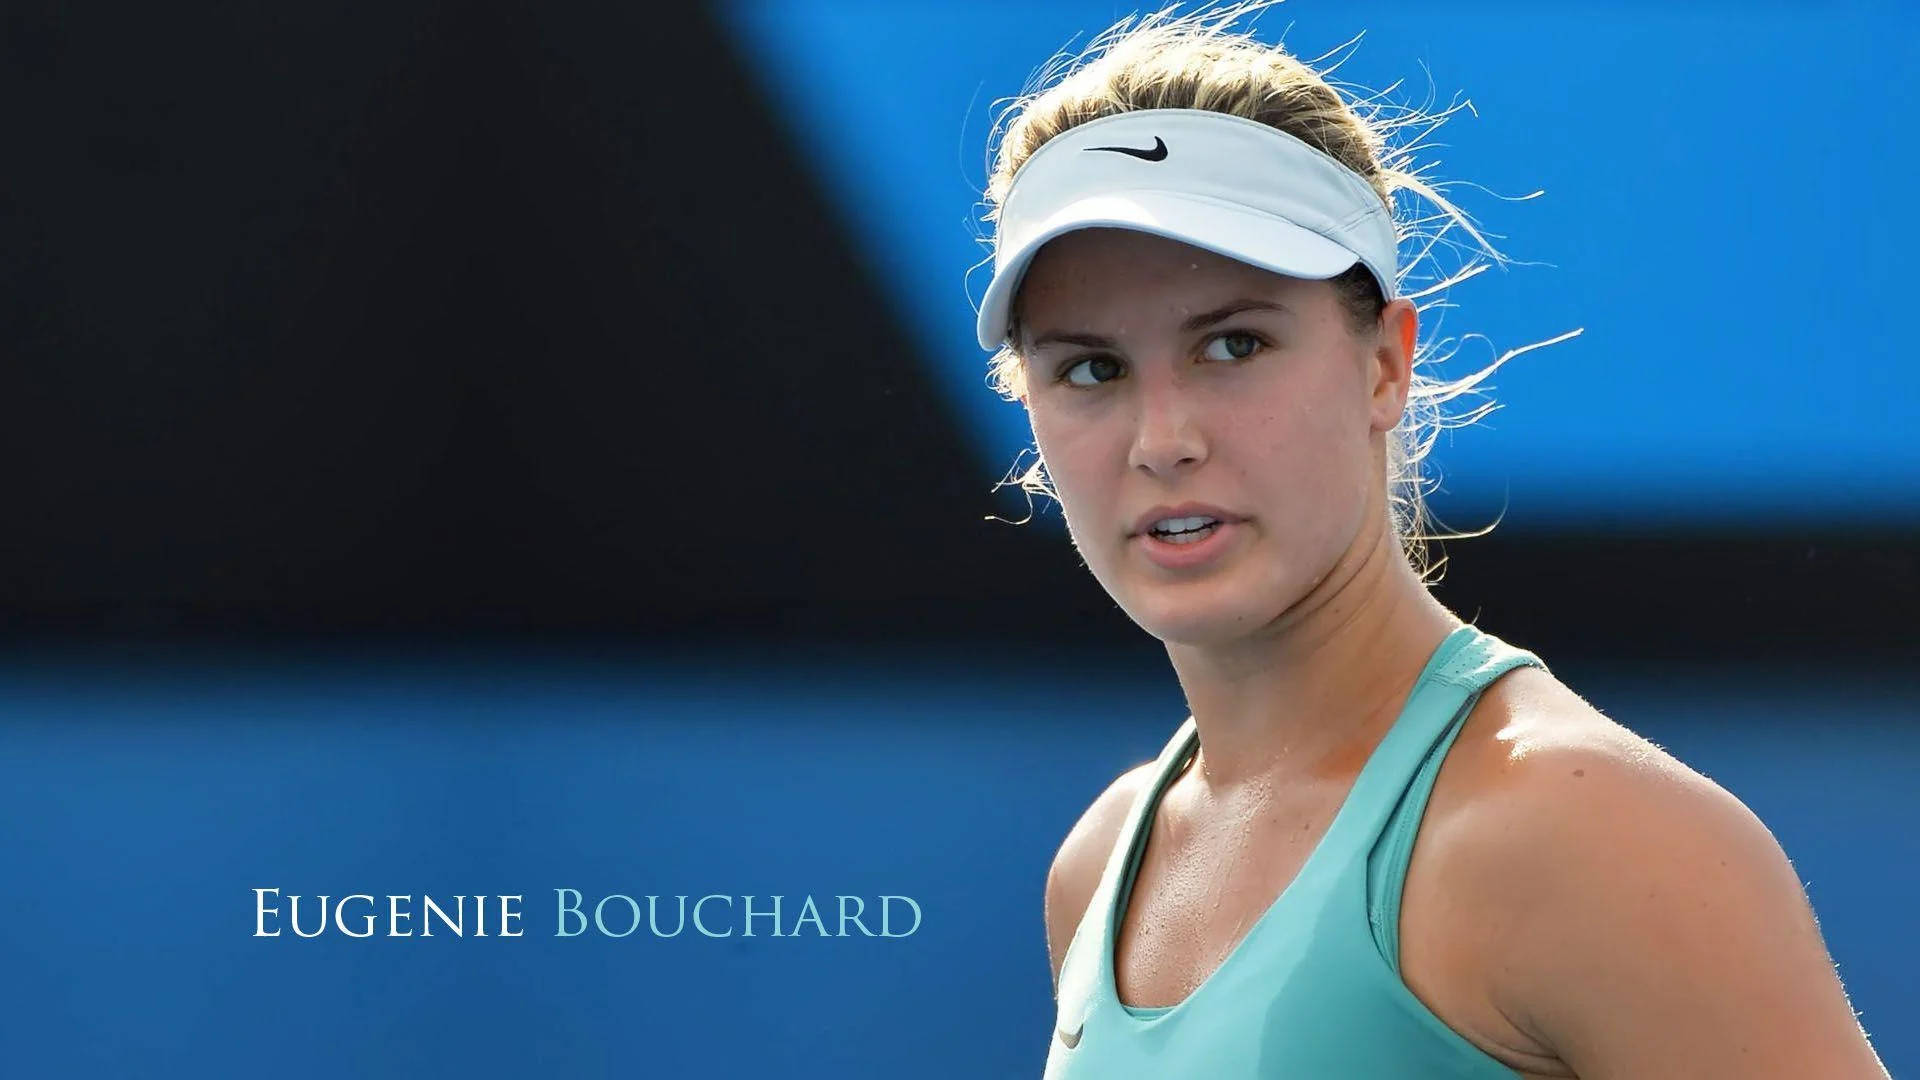 Eugenie Bouchard During A Game Wallpaper